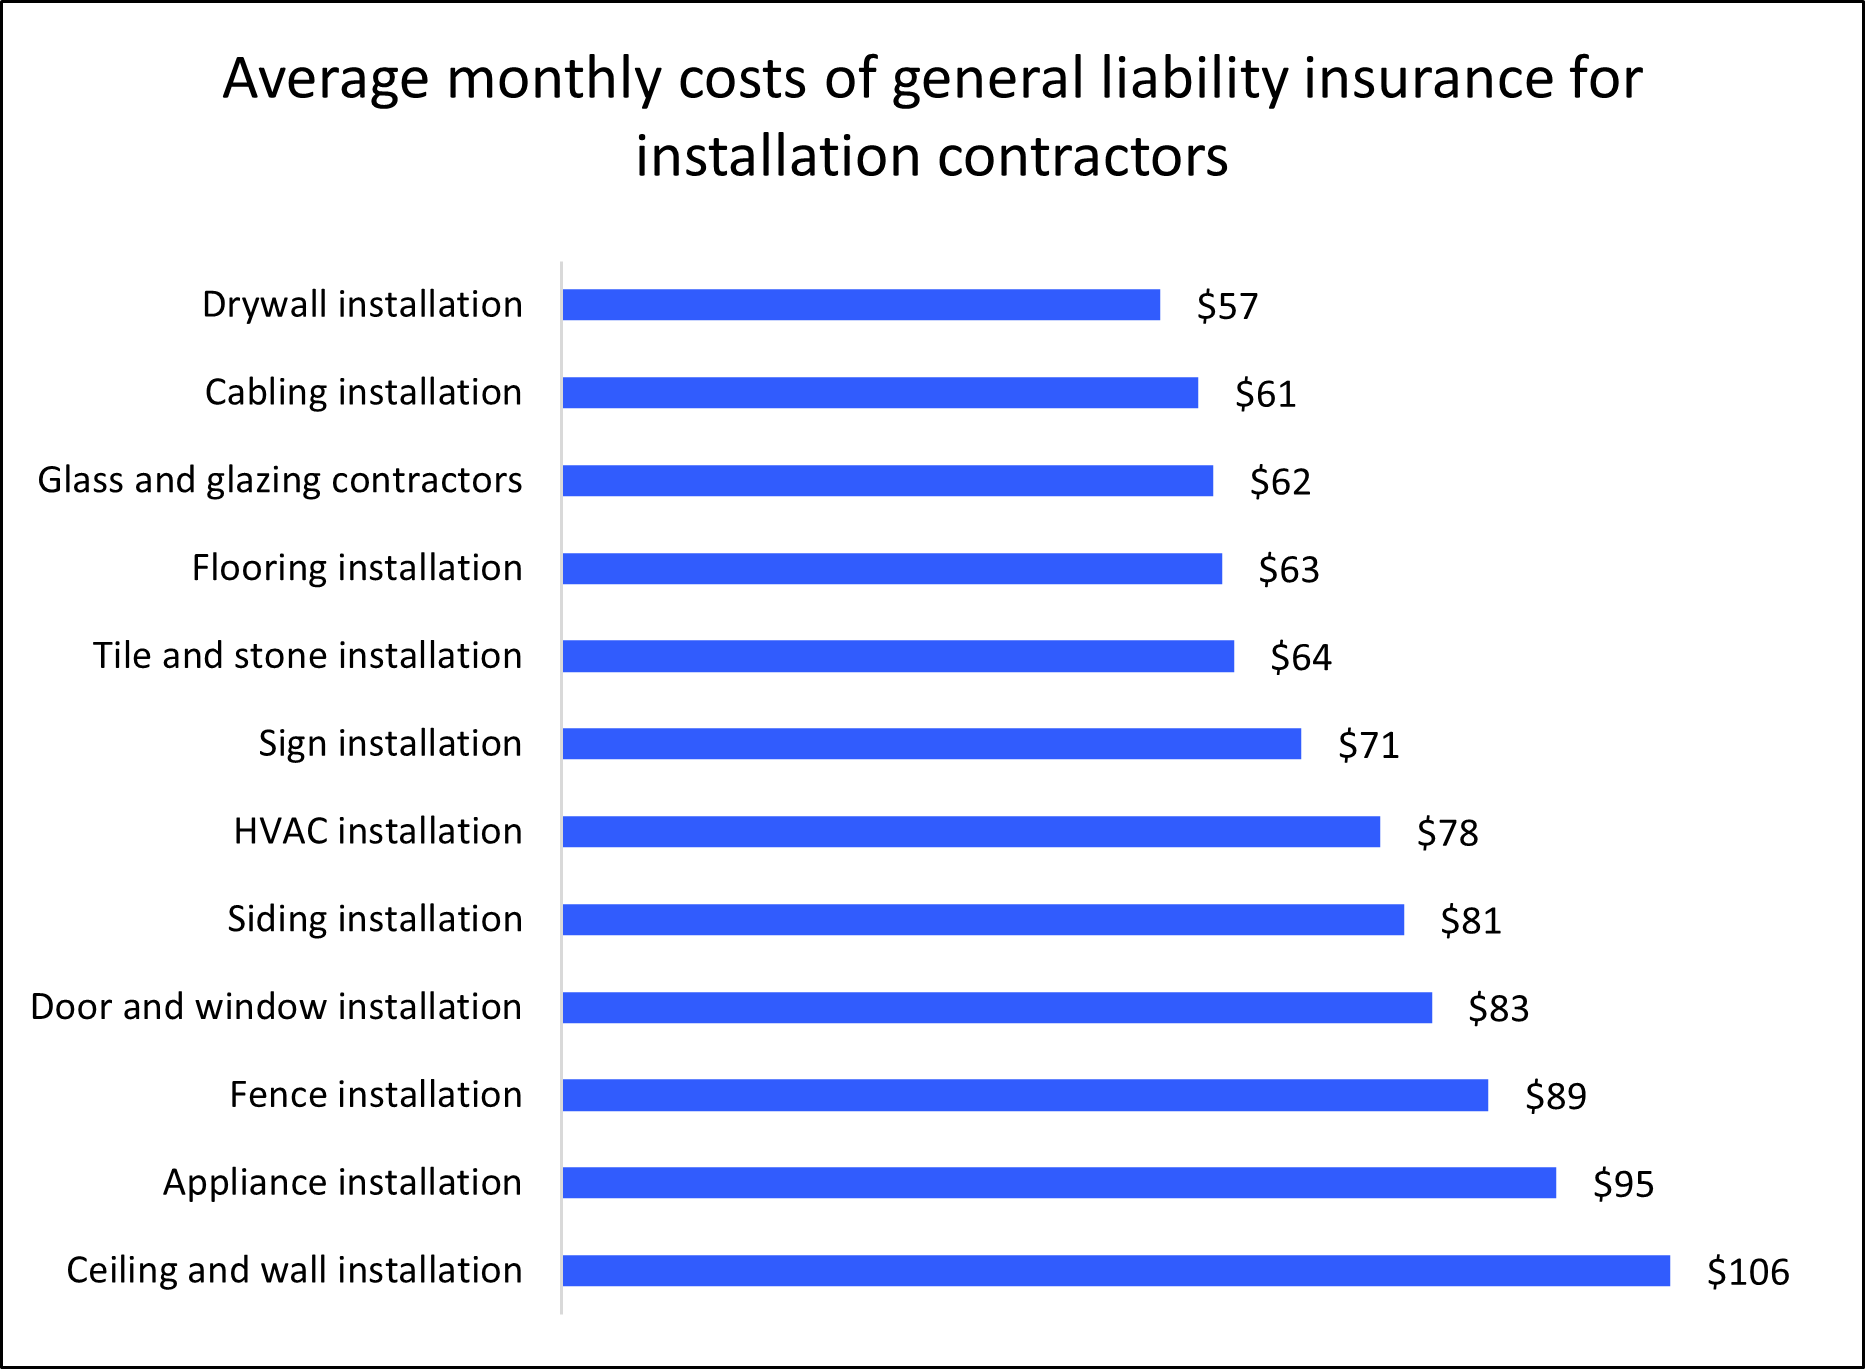 Average monthly cost of general liability insurance for installation businesses by profession.